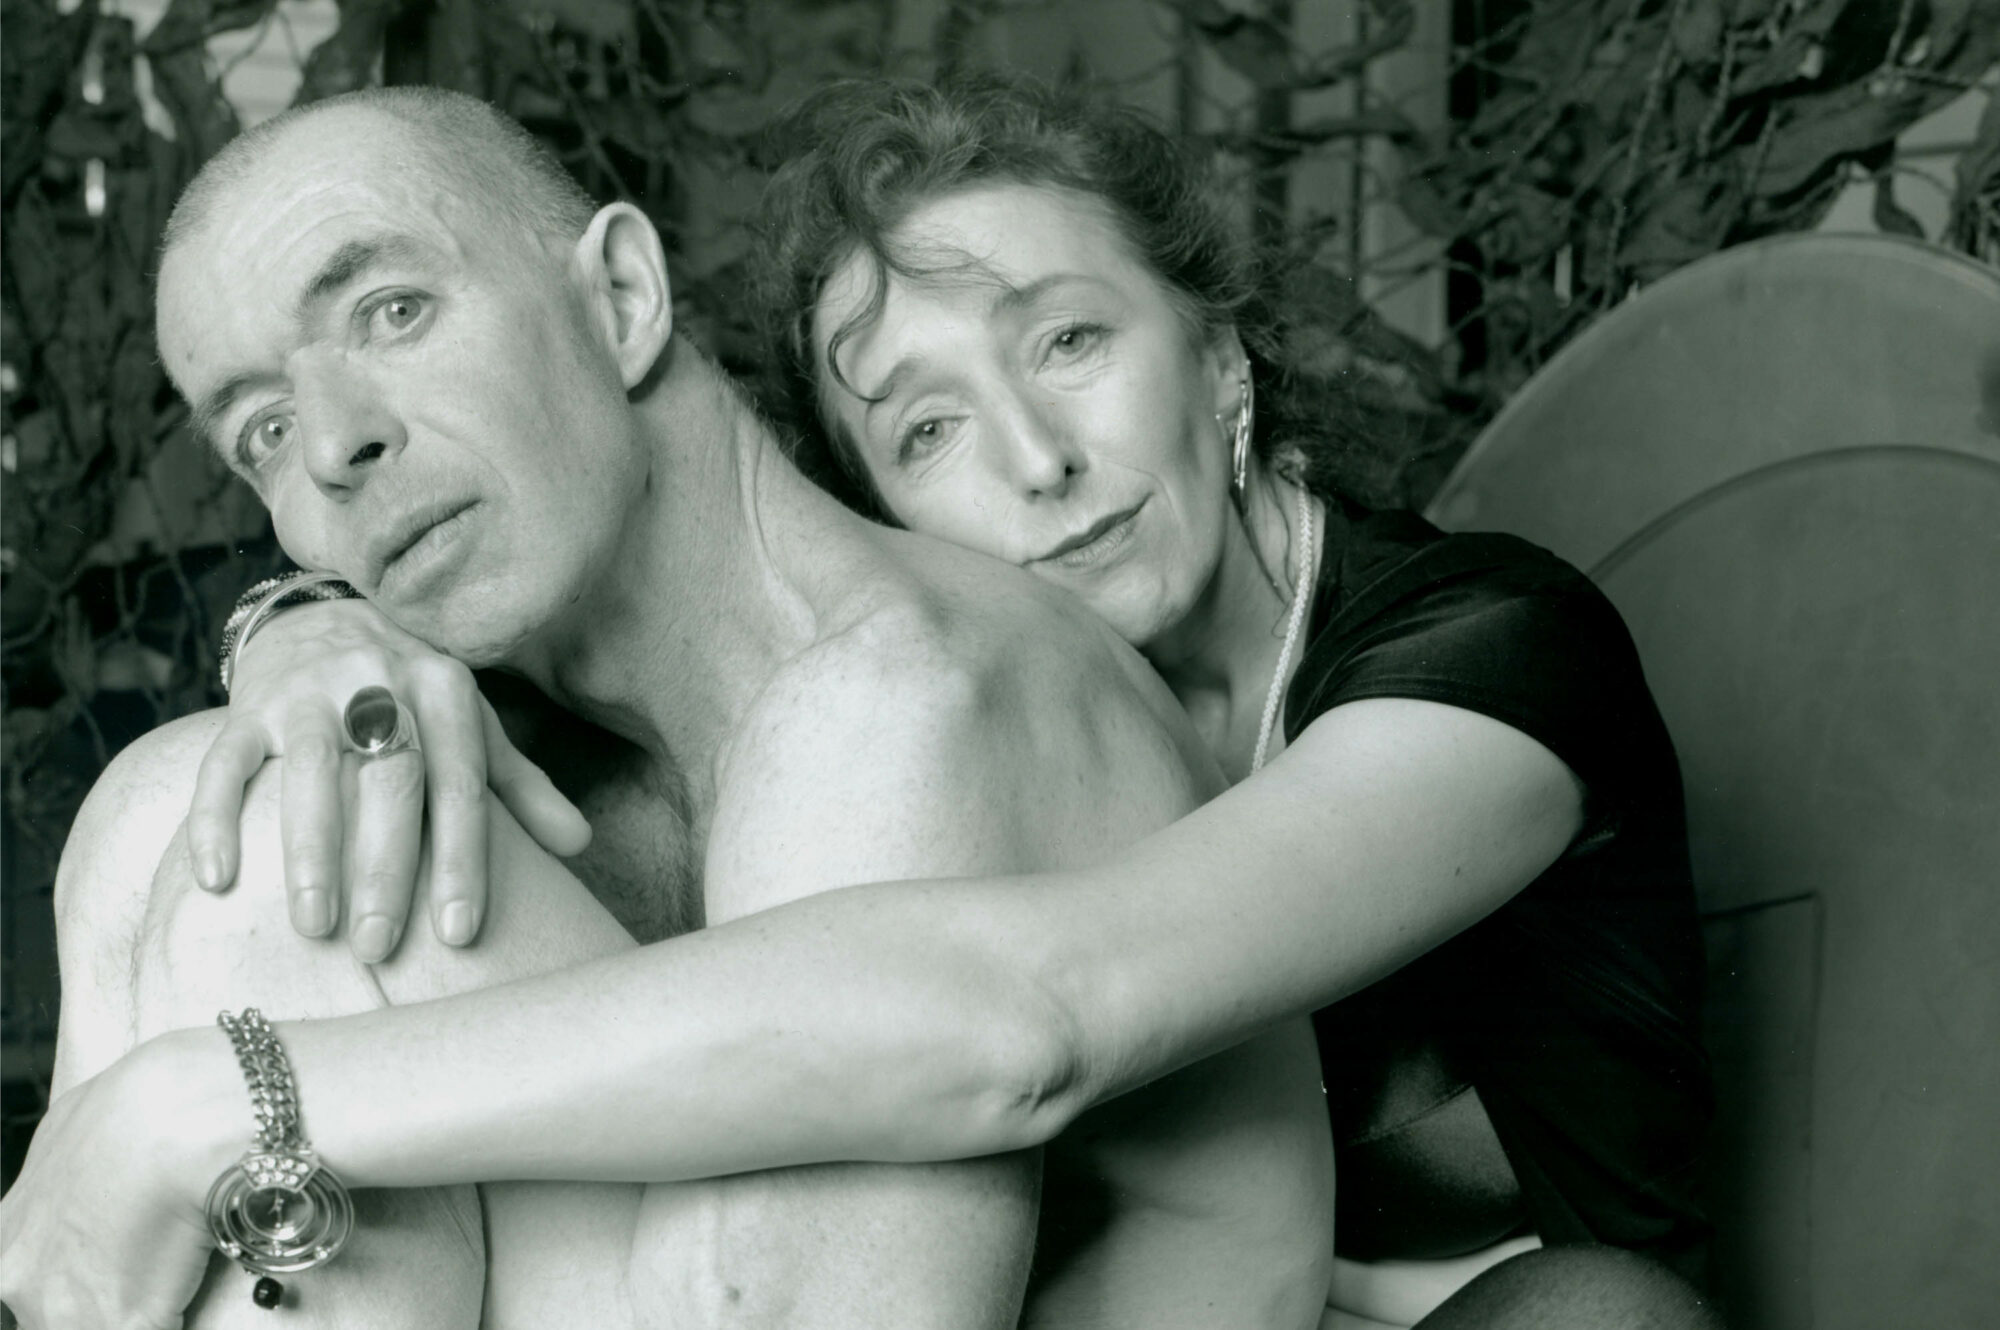 Portrait of a nude older man and a woman embracing him.